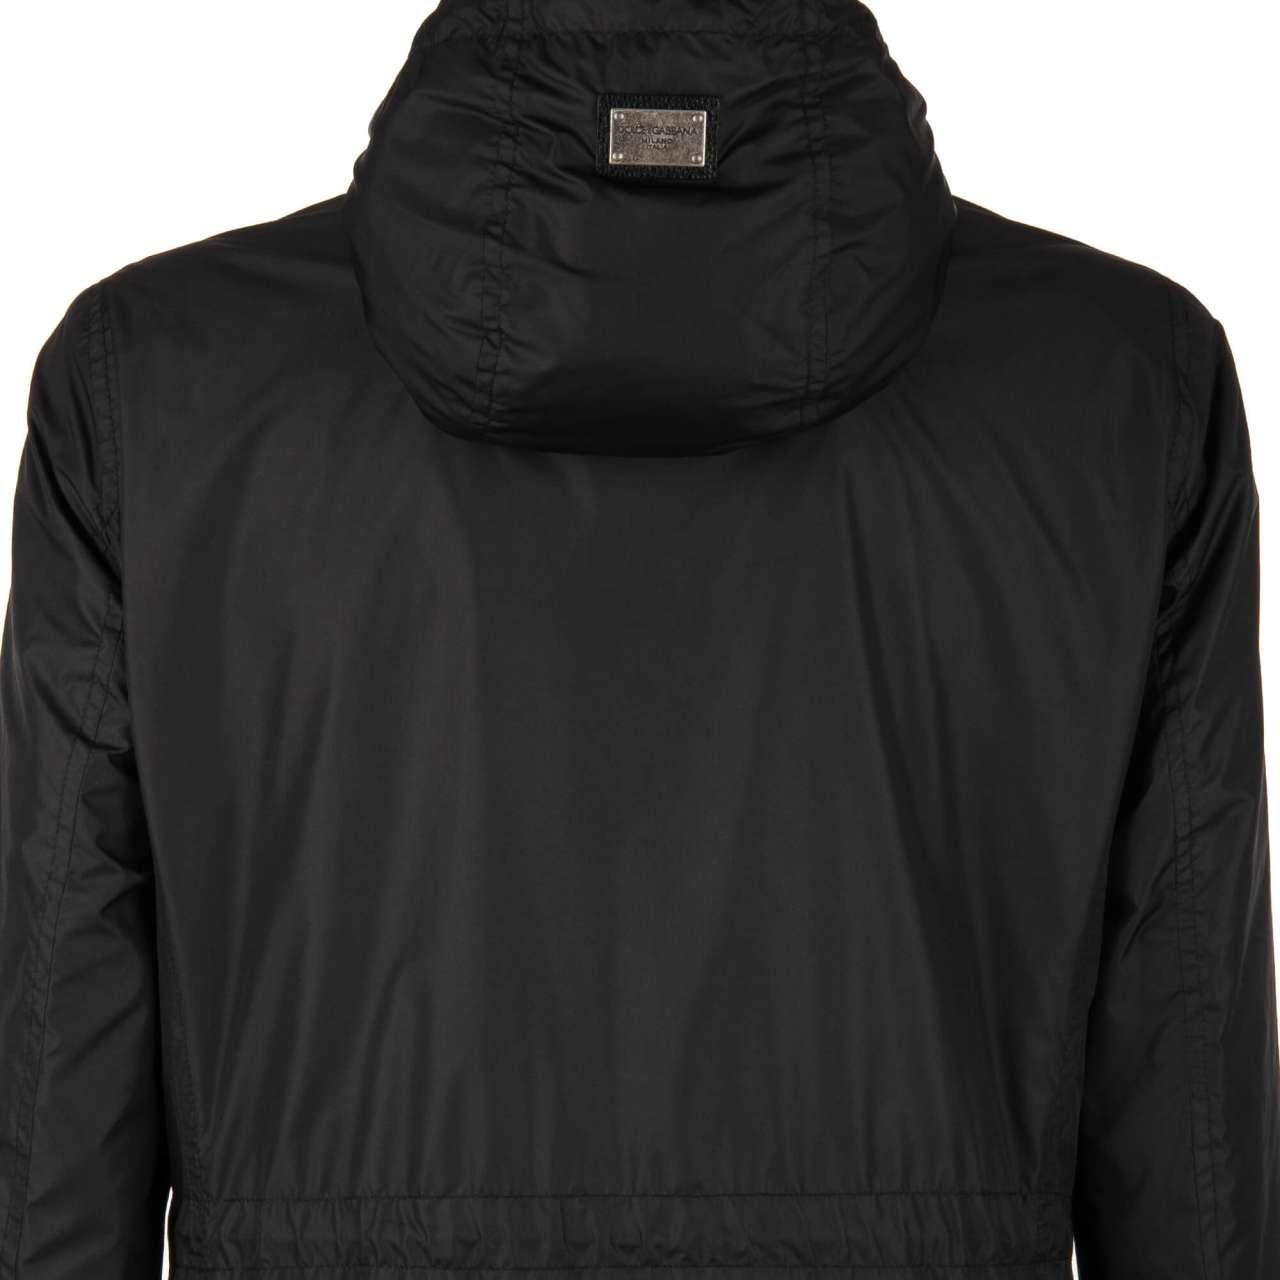 Dolce & Gabbana Classic Rain Parka Jacket with Pockets and Hoody Black 44 For Sale 1